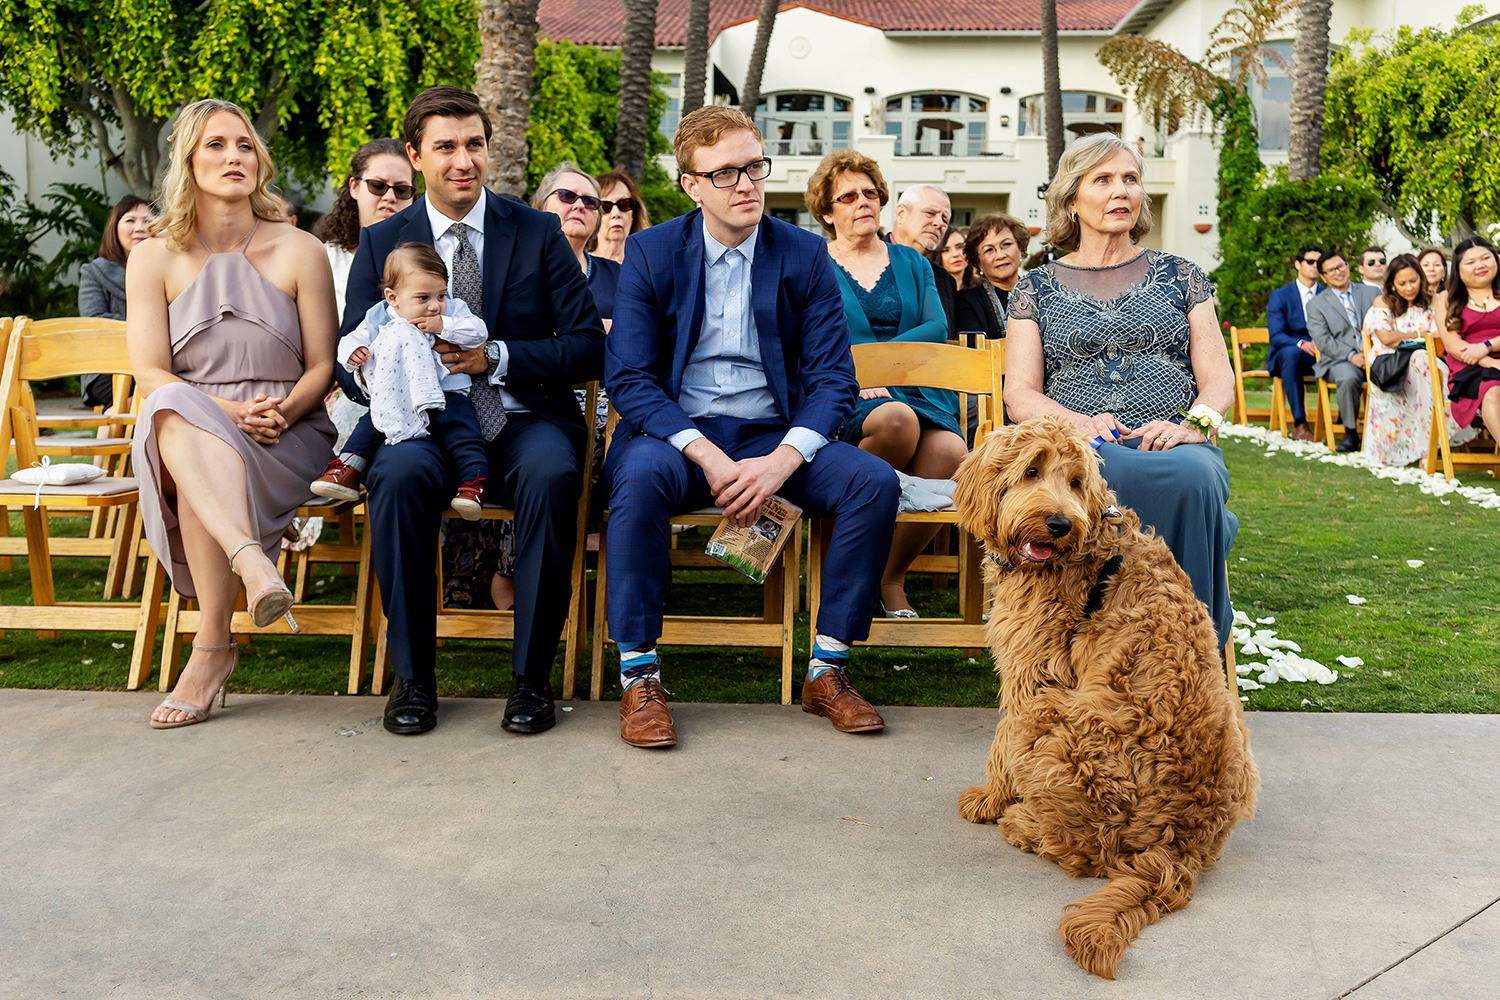 The bride and groom's dog watching the wedding ceremony.